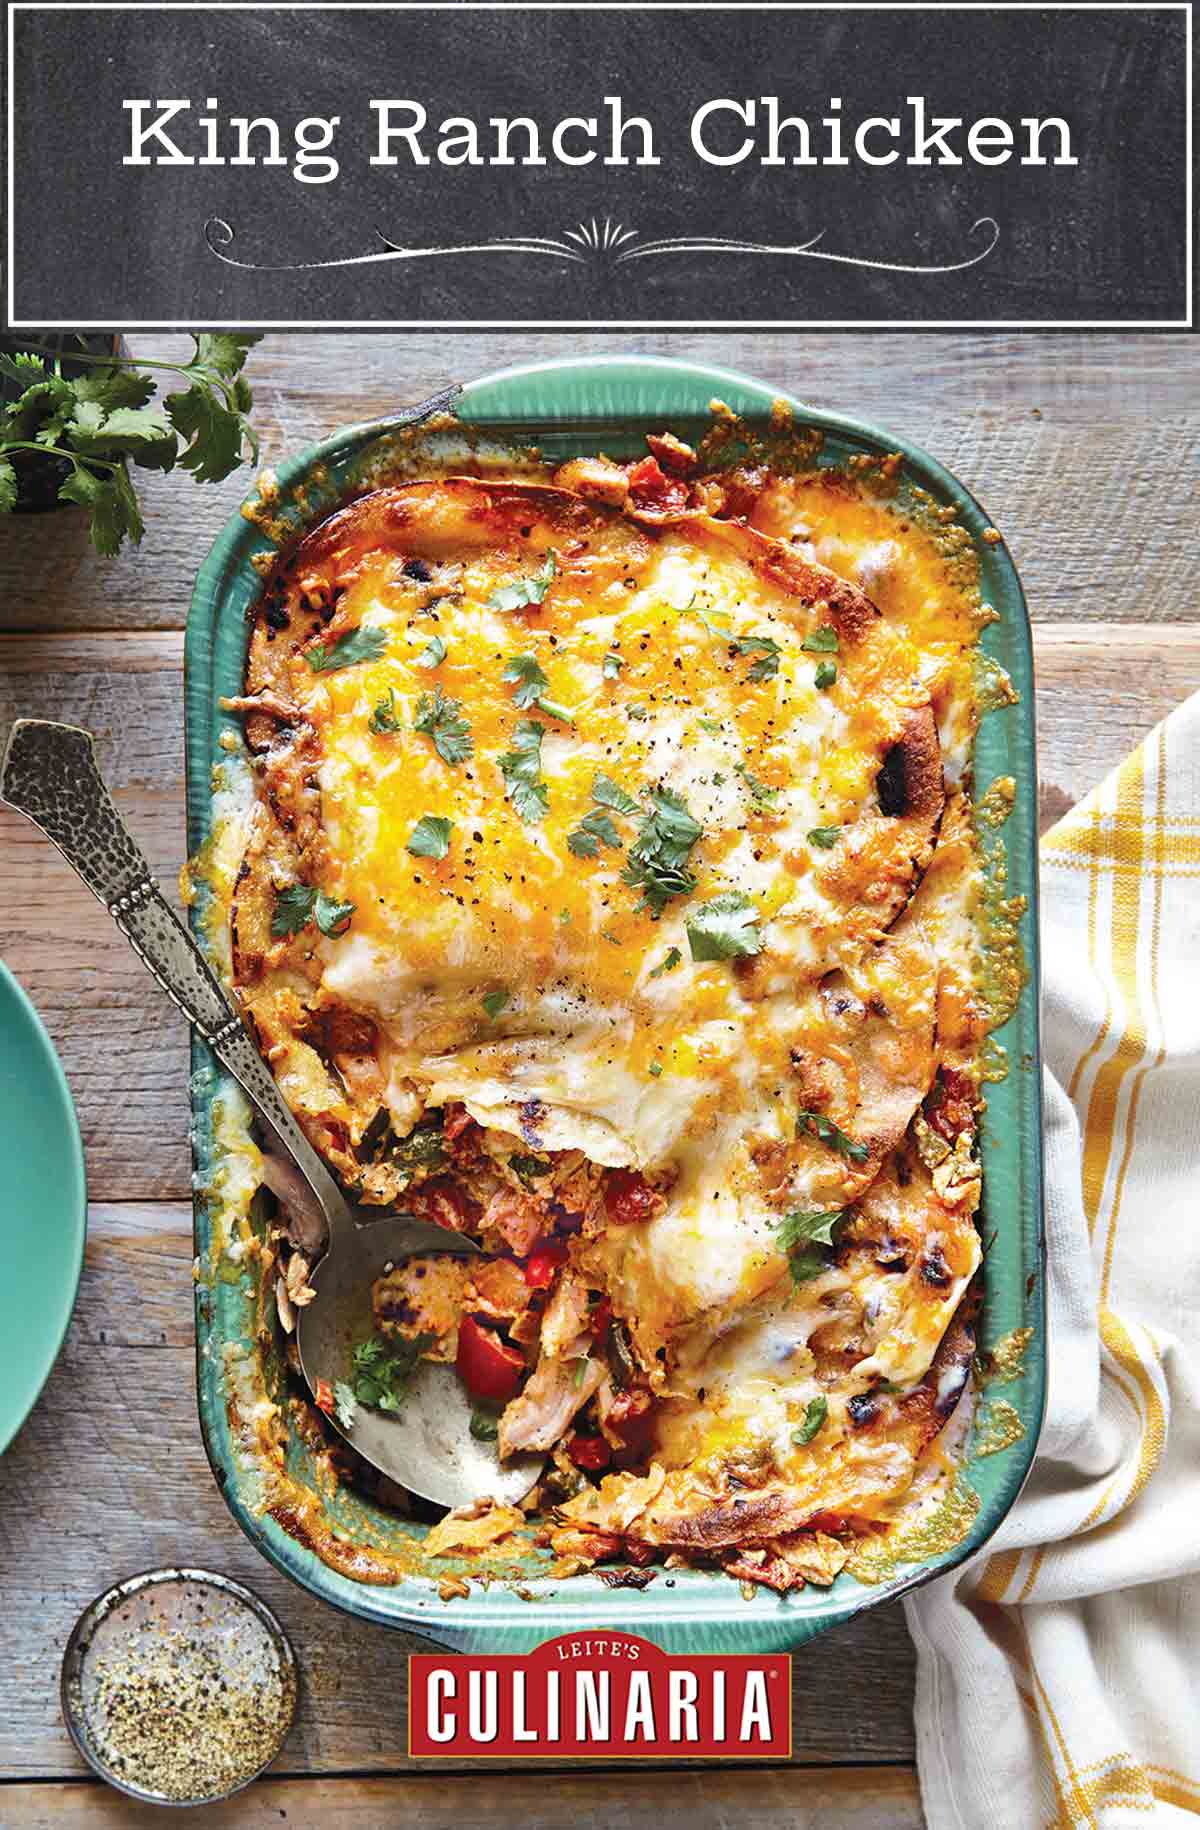 King Ranch chicken in a large green casserole dish with a serving spoon and a portion missing. A plate, a dish towel and a bowl of spices next to it.